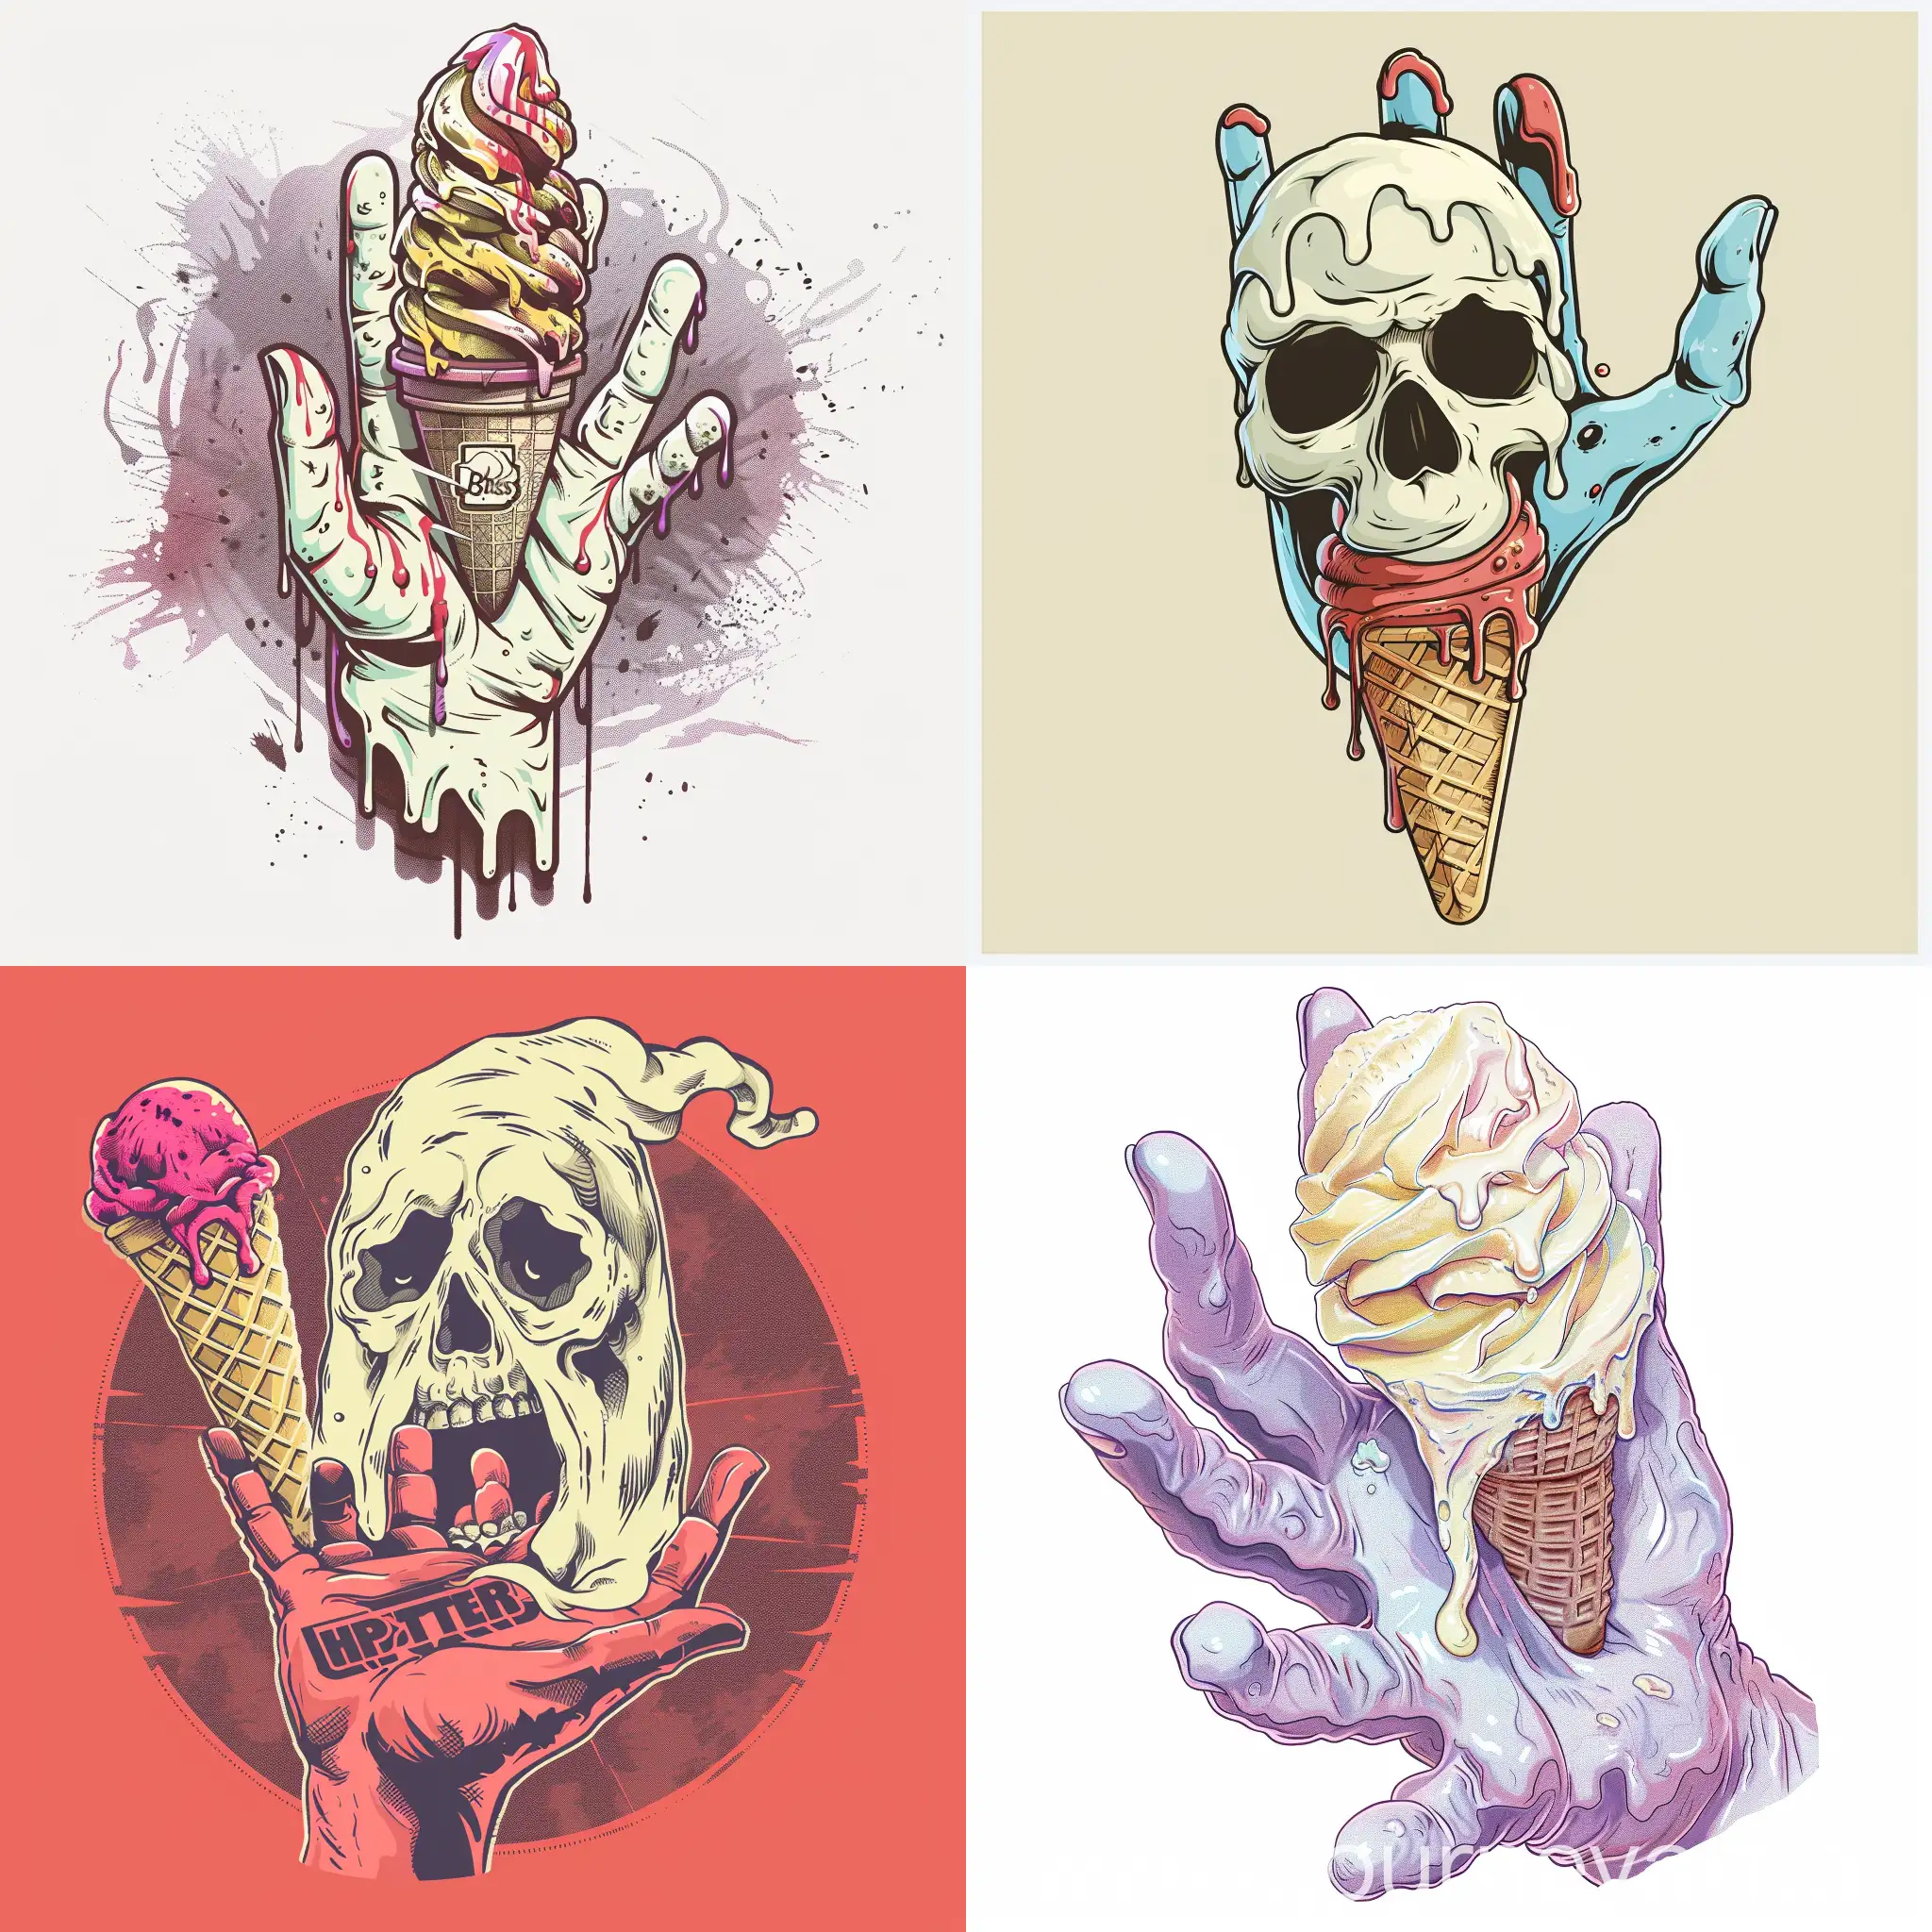 use logo Ghpst busters and put into the handof ghost the ice cream